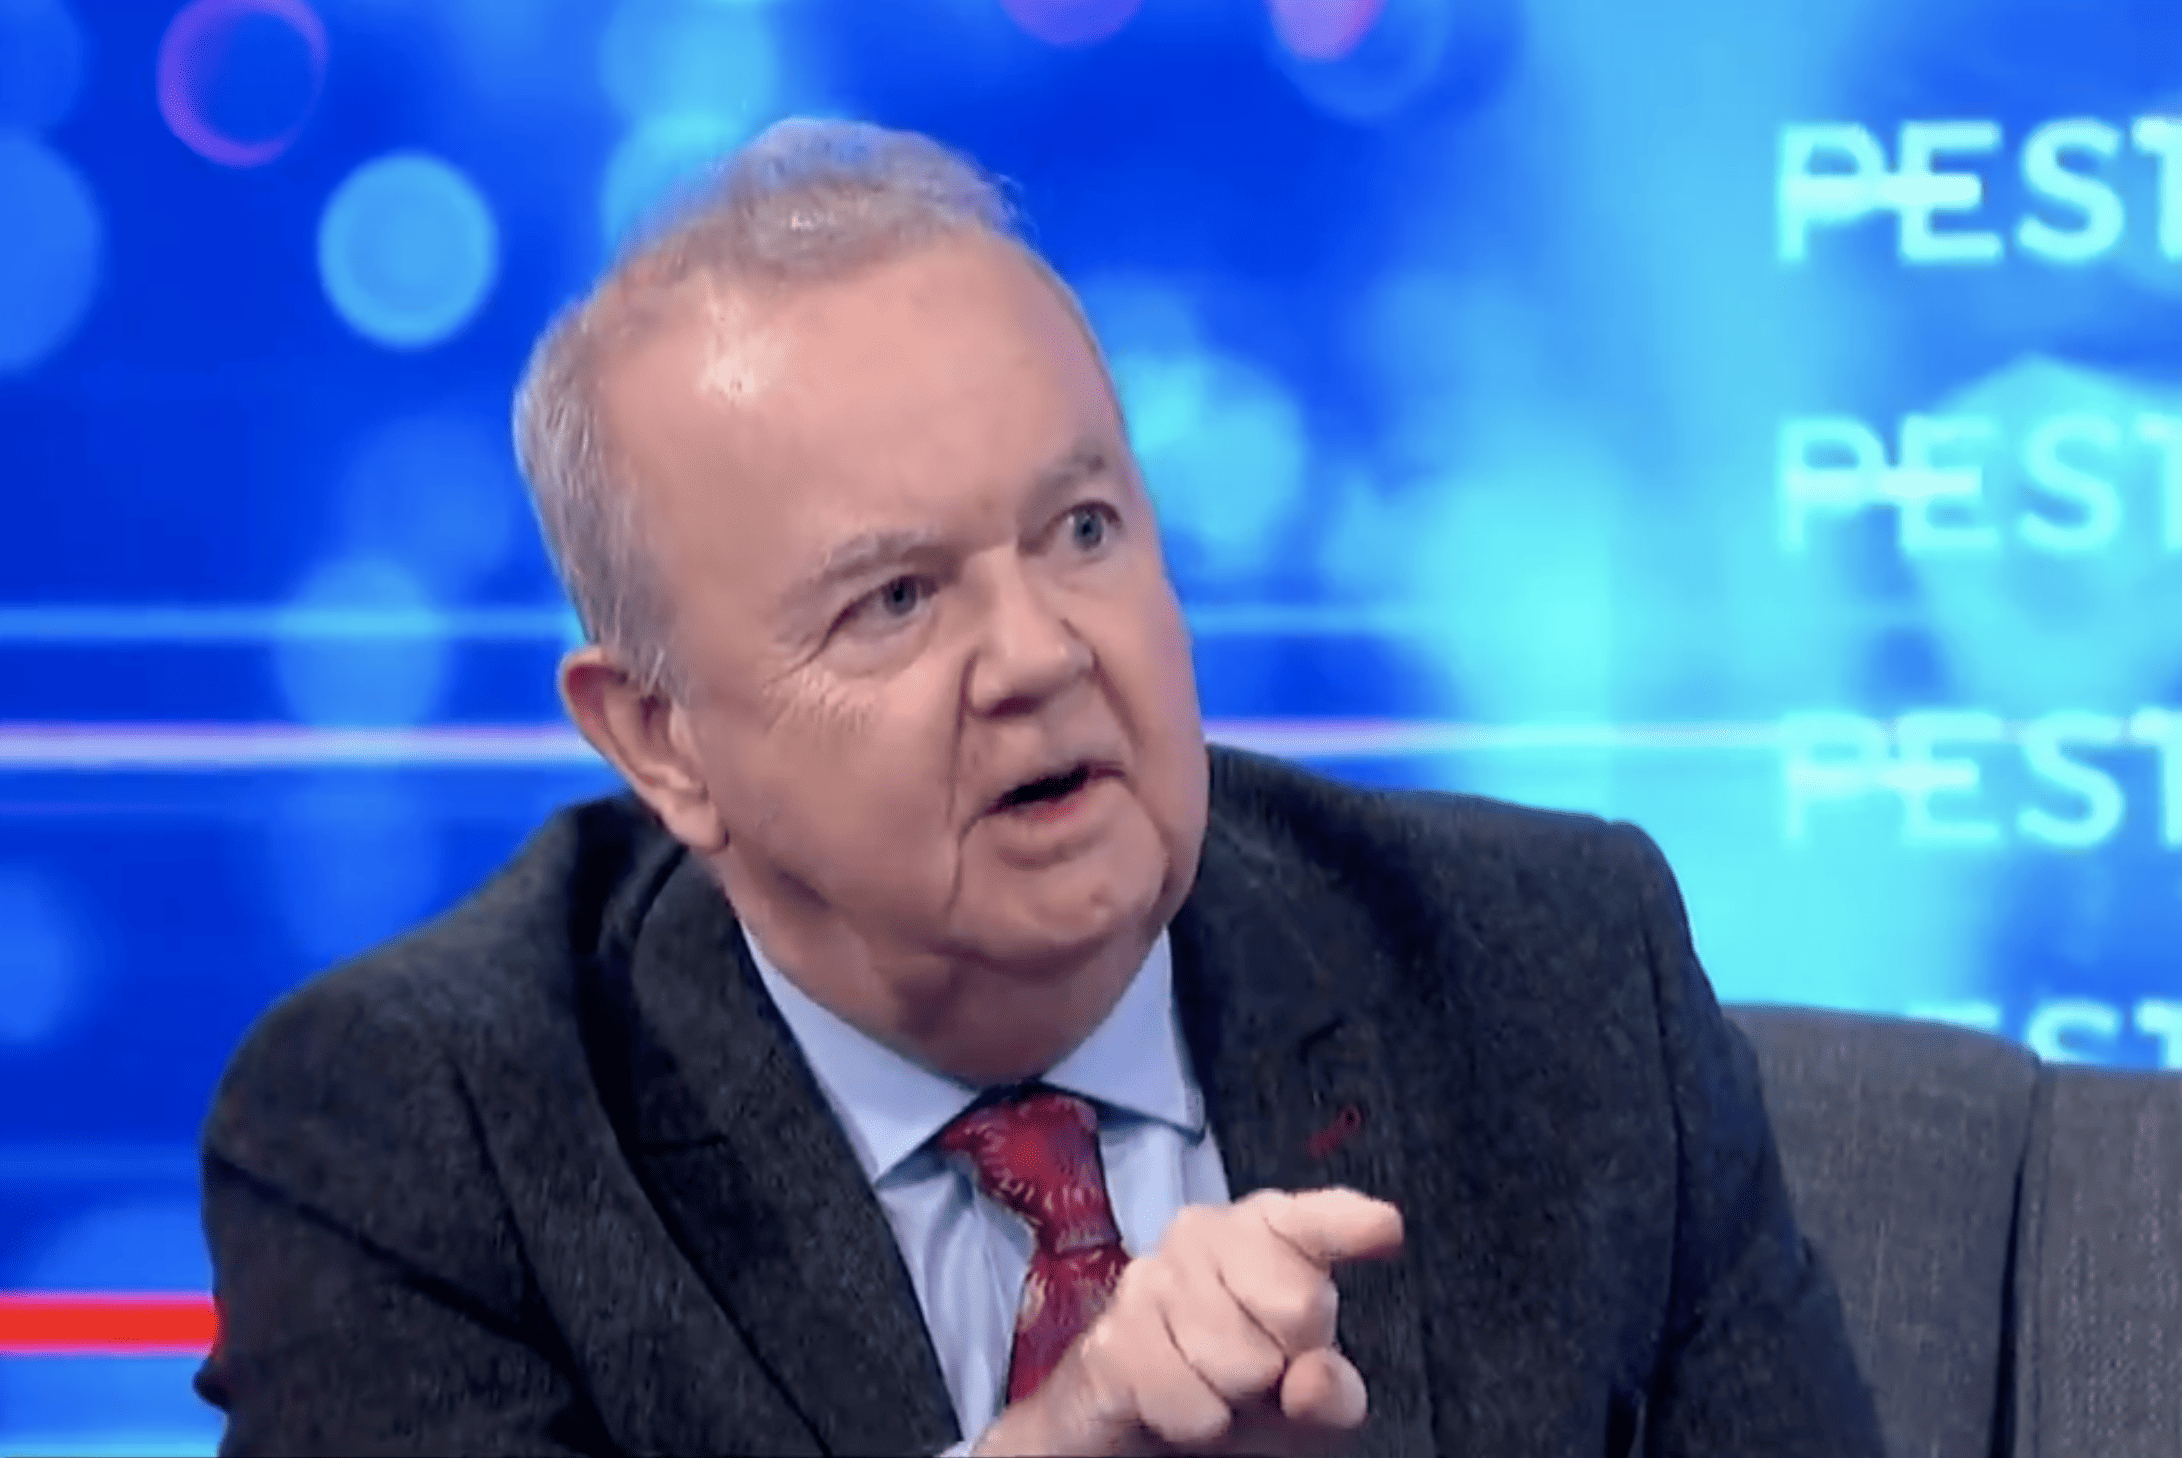 Clip of Ian Hislop pointing out extent of Russian money in Tory Party resurfaces